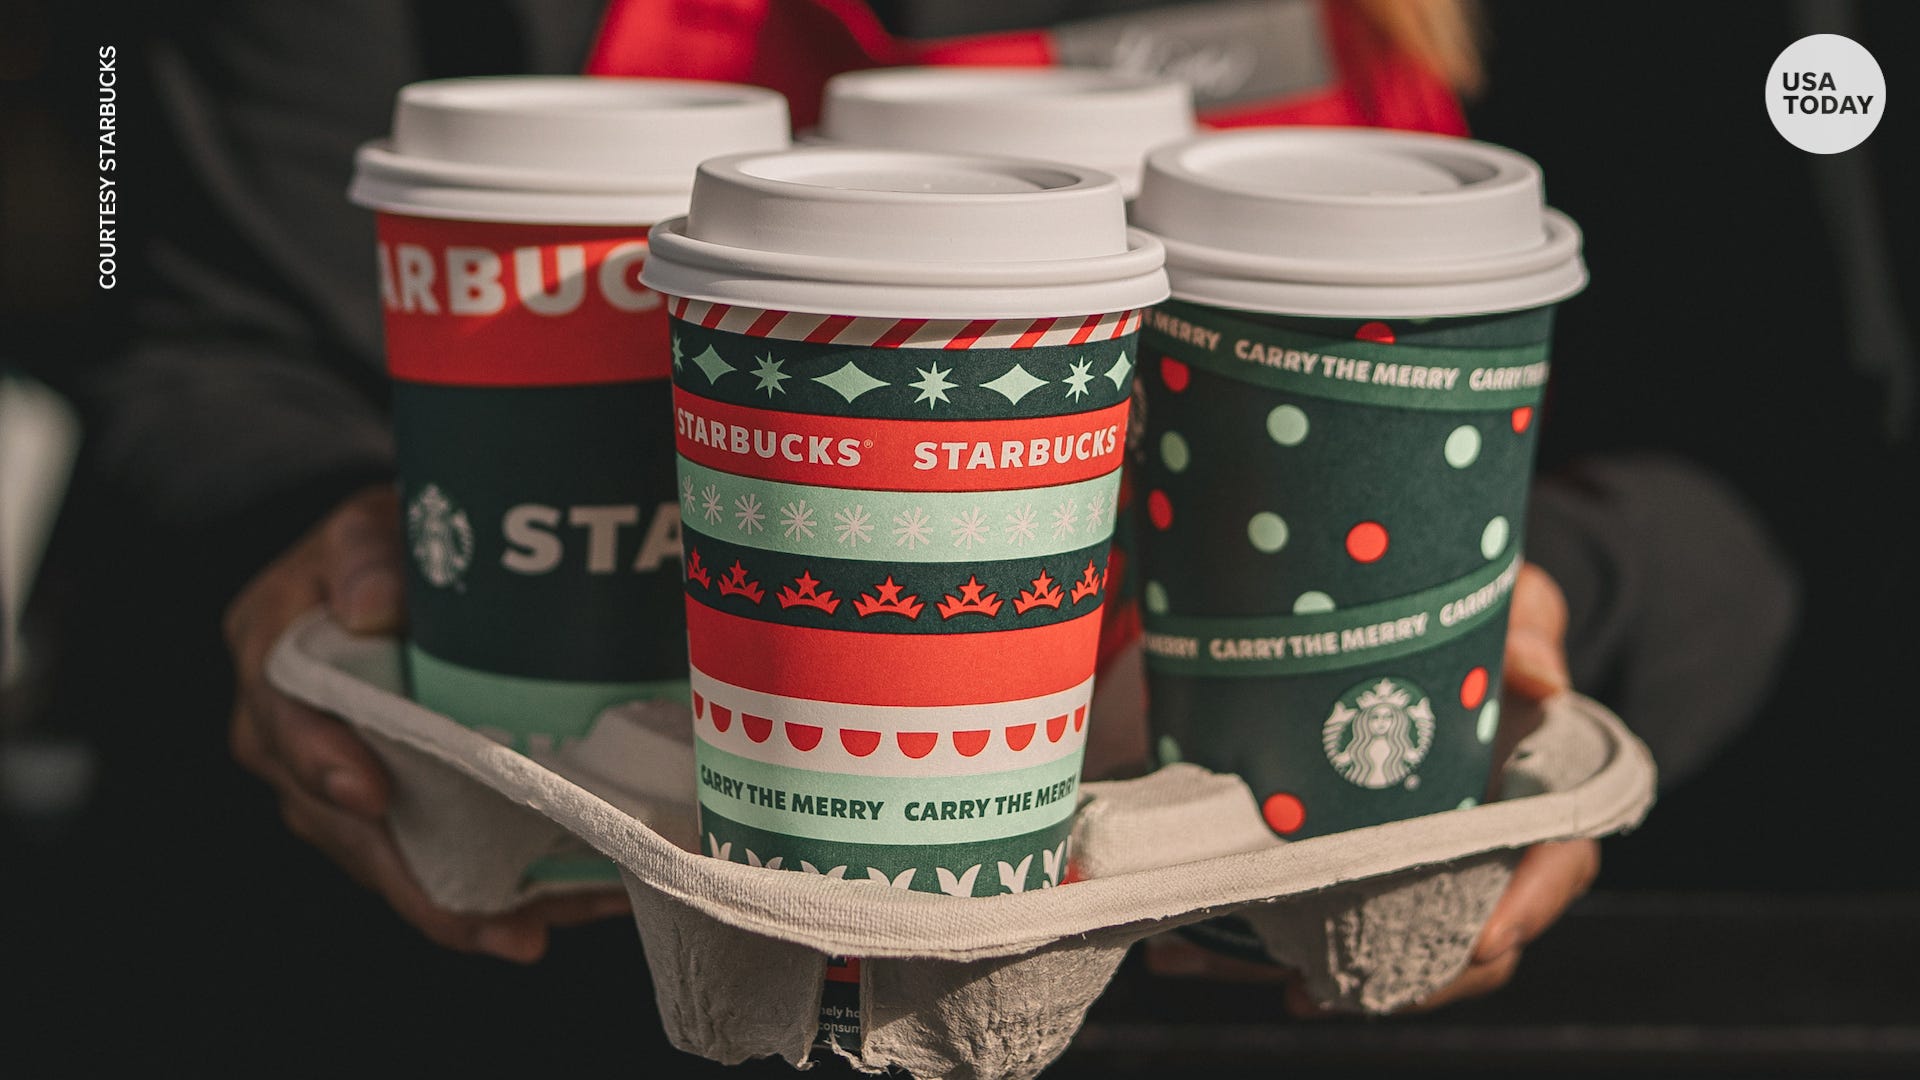 Starbucks debuts newest free reusable red cup. Here's what past years